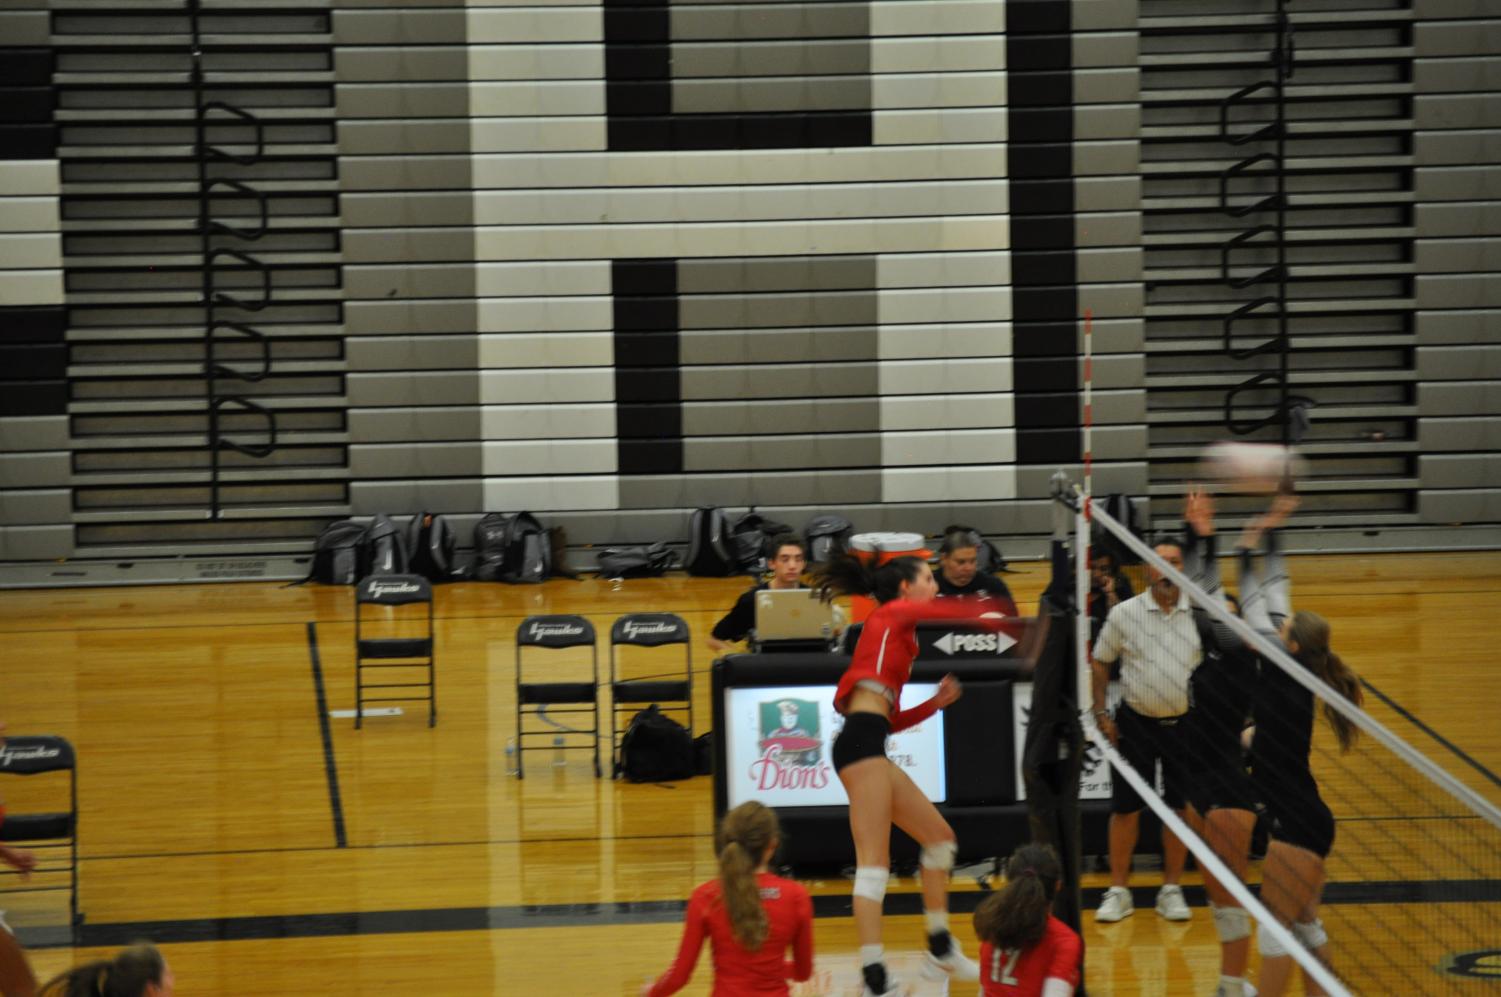 Volleyball+Mid-Season+Recap%3A+Volleyball+Team+is+on+the+Rise